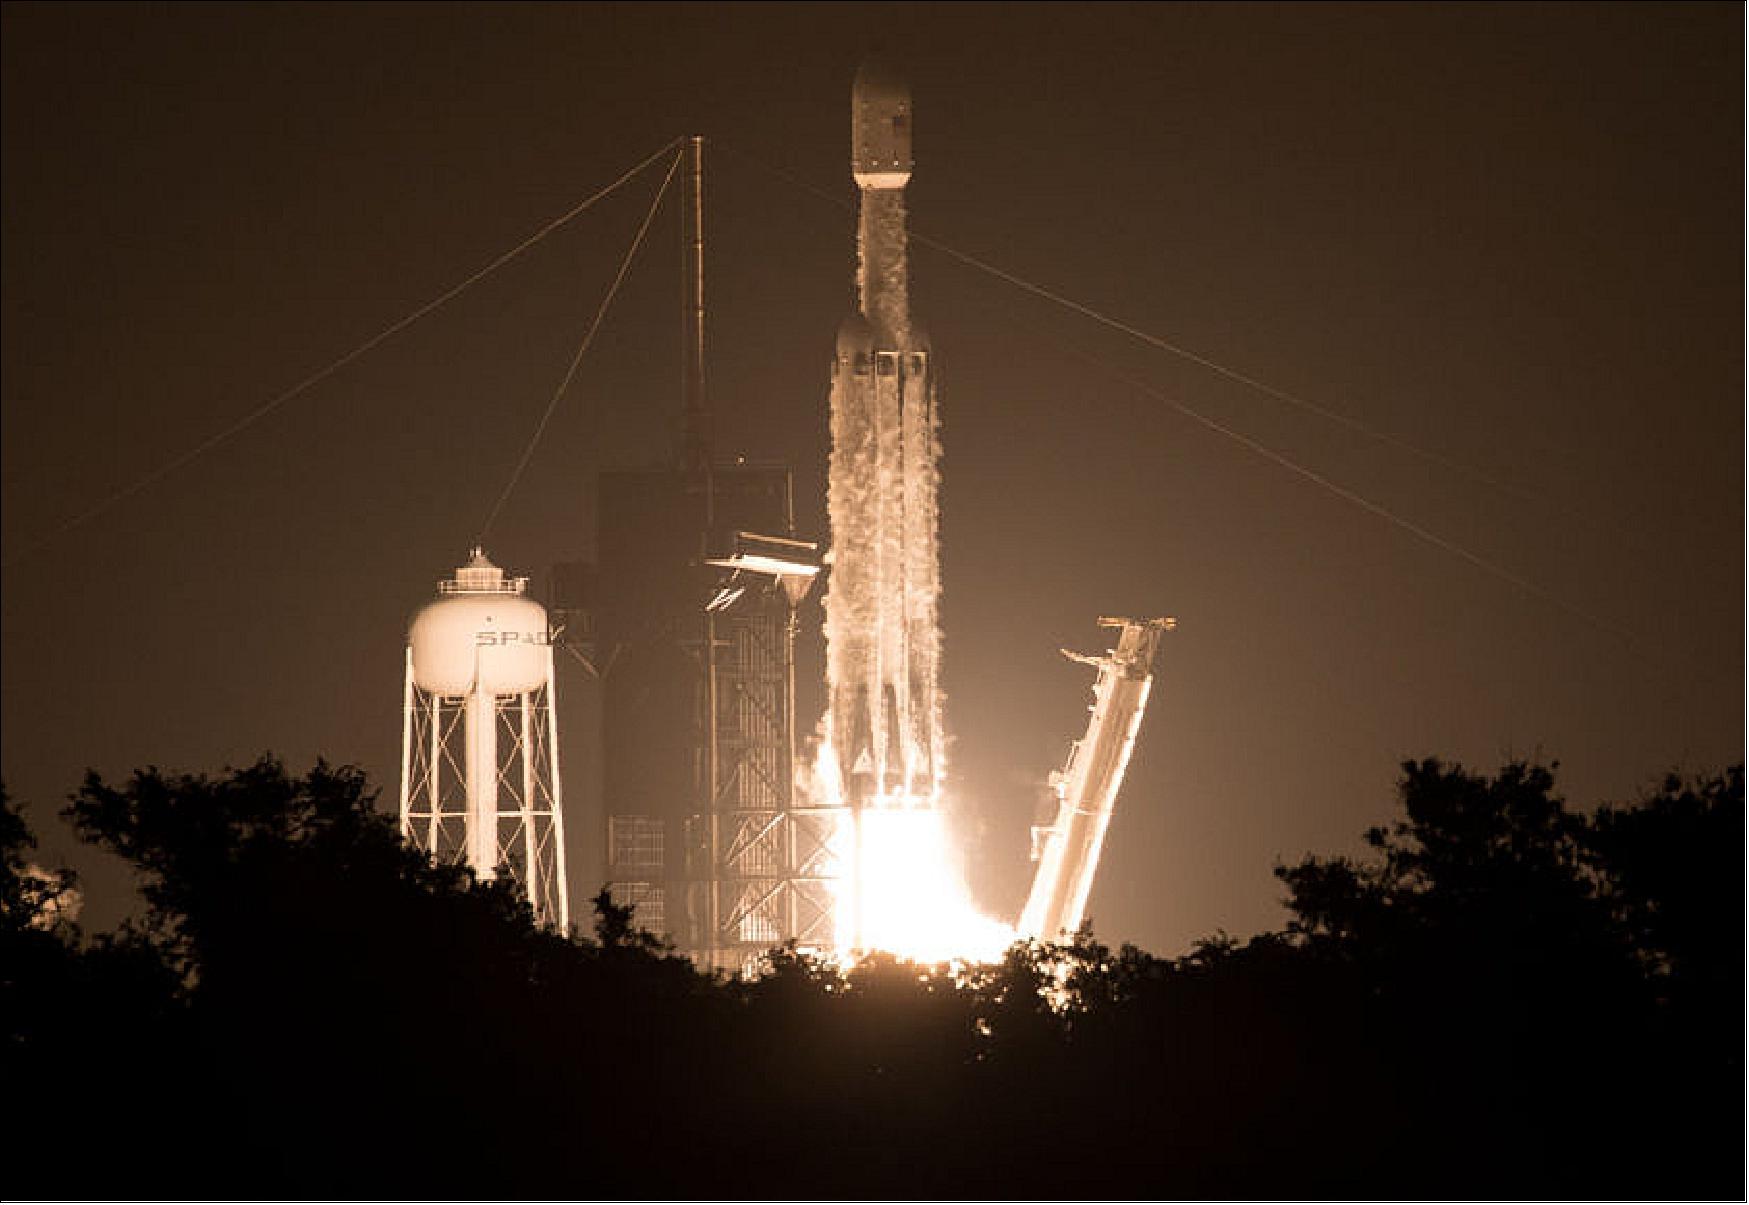 Figure 10: SpaceX's Falcon Heavy rocket, carrying OTB-1 and 23 other spacecraft for the U.S. Air Force's STP-2 mission, lifts off from Kennedy Space Center on 25 June 2019 at 06:30 UTC. The satellites include four NASA technology and science payloads that will study non-toxic spacecraft fuel, deep space navigation, "bubbles" in the electrically-charged layers of Earth's upper atmosphere, and radiation protection for satellites. (image credit: NASA) 14)